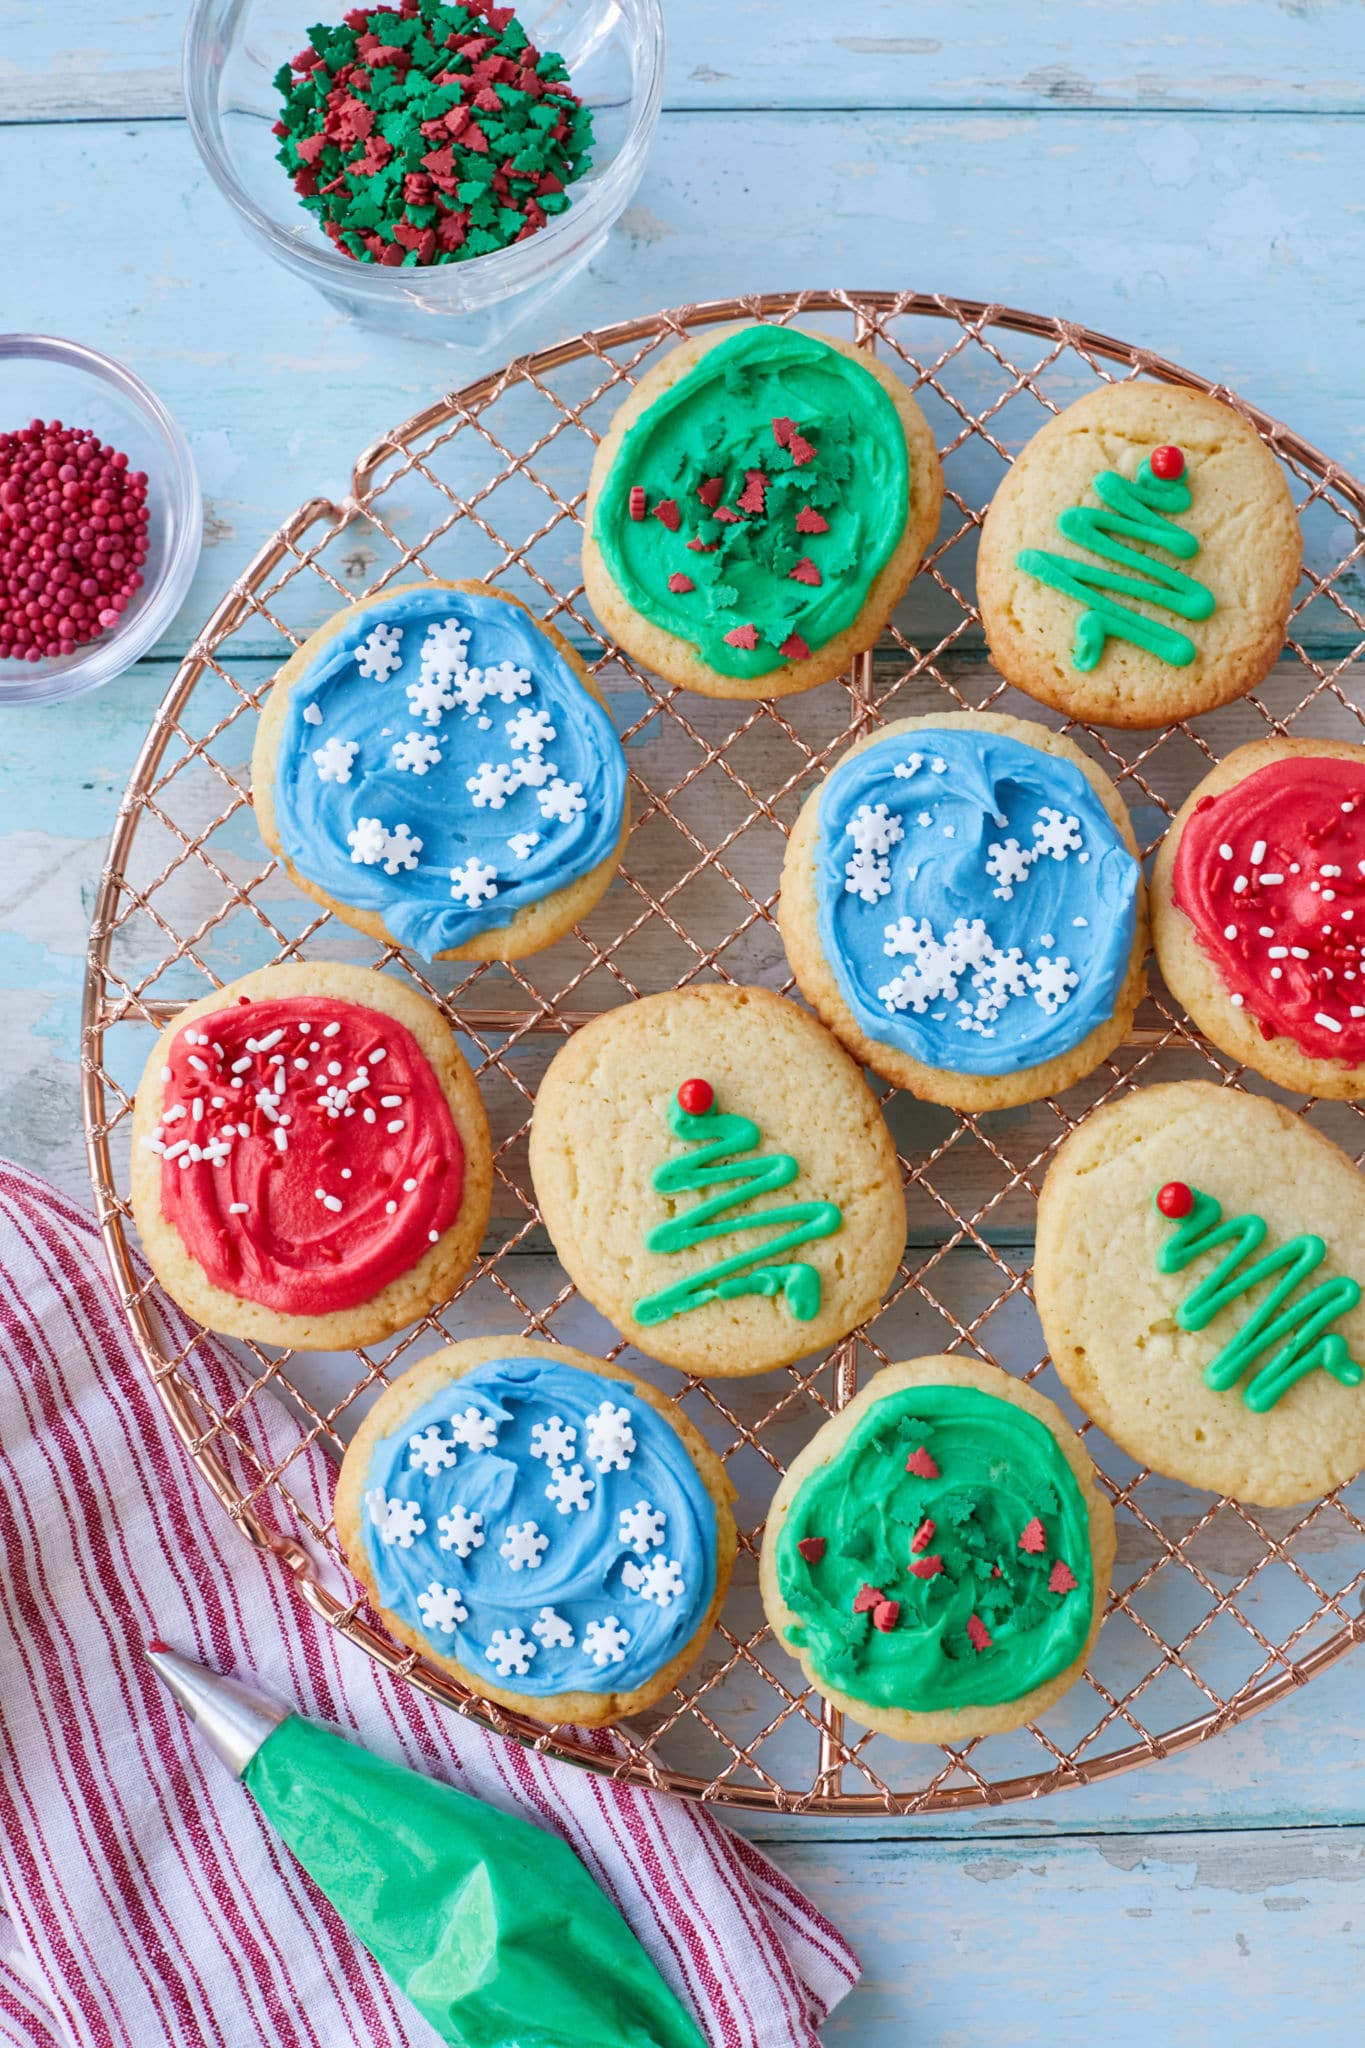 Homemade soft sugar cookies are presented on a golden wire rack. The sugar cookies are decorated in different colored icing and toppings, including red, blue, and green icing, snowflake sprinkles, and Christmas tree decoration.